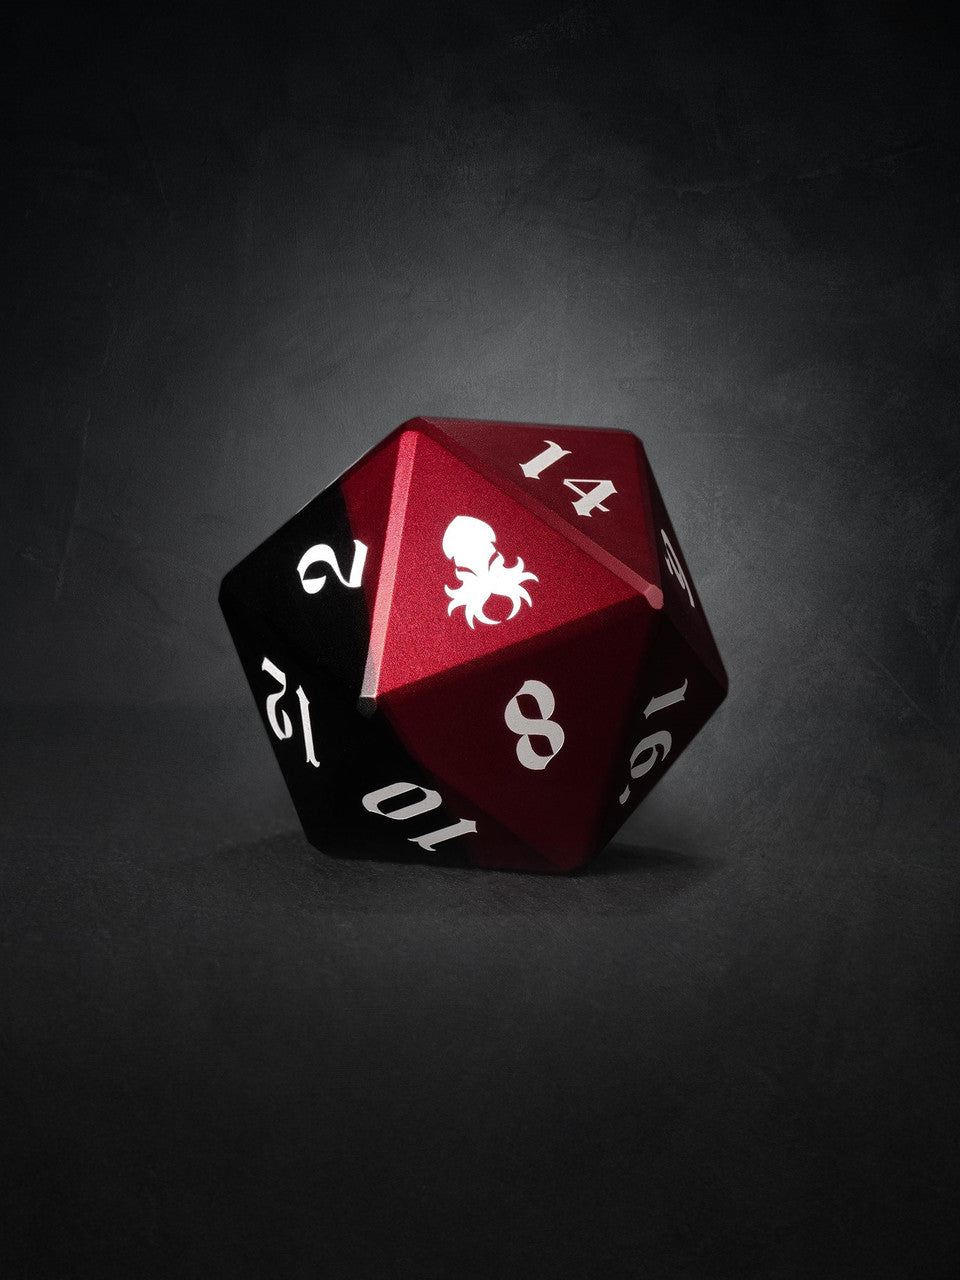 Vulcan: Blood Knight 50mm Black and Red Precision Aluminum Single D20